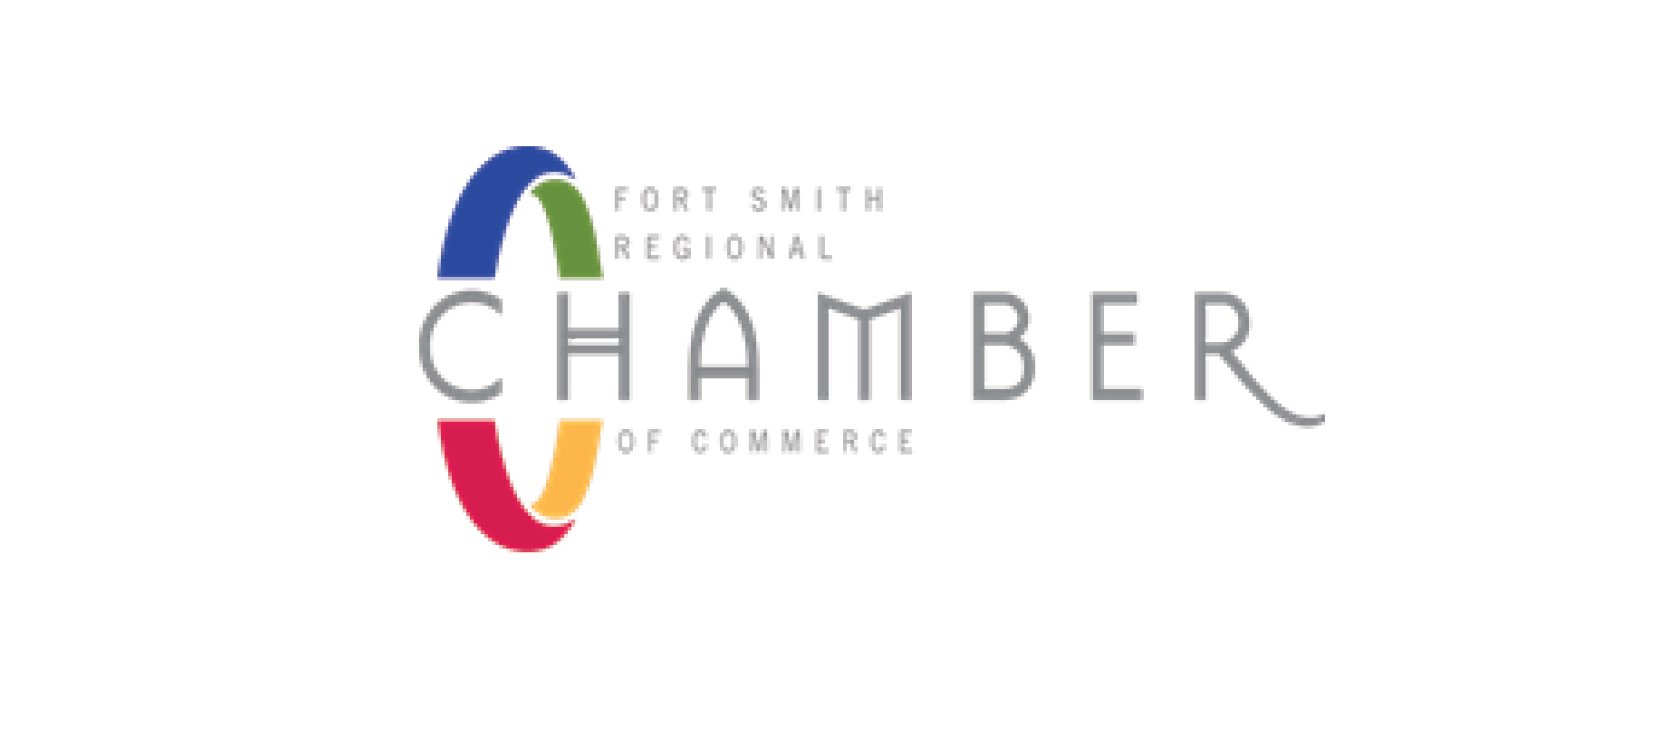 Fort Smith Regional Chamber of Commerce